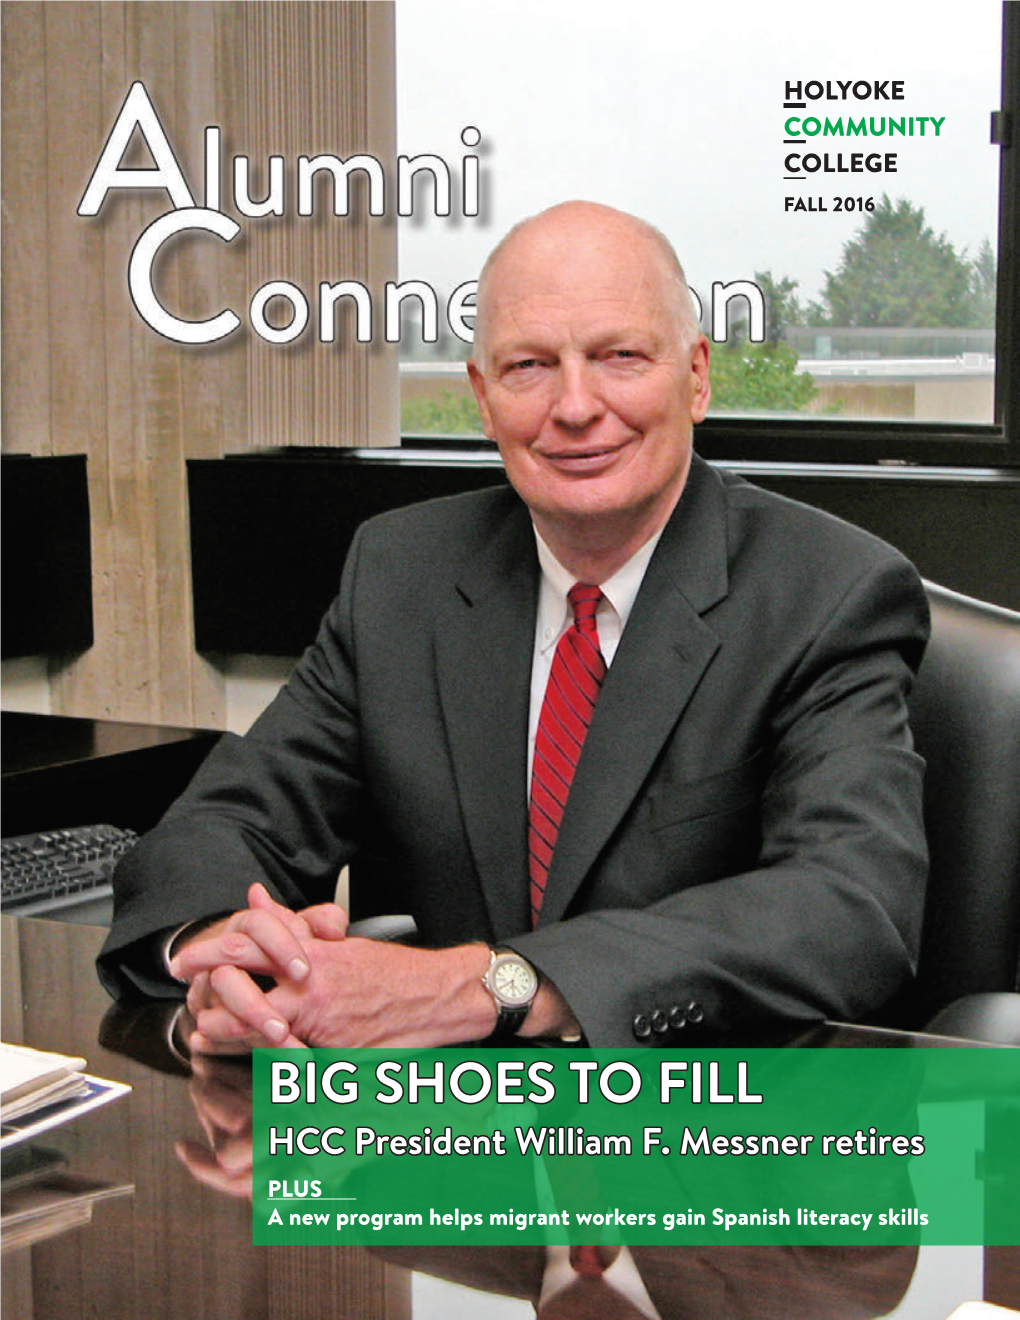 BIG SHOES to FILL HCC President William F